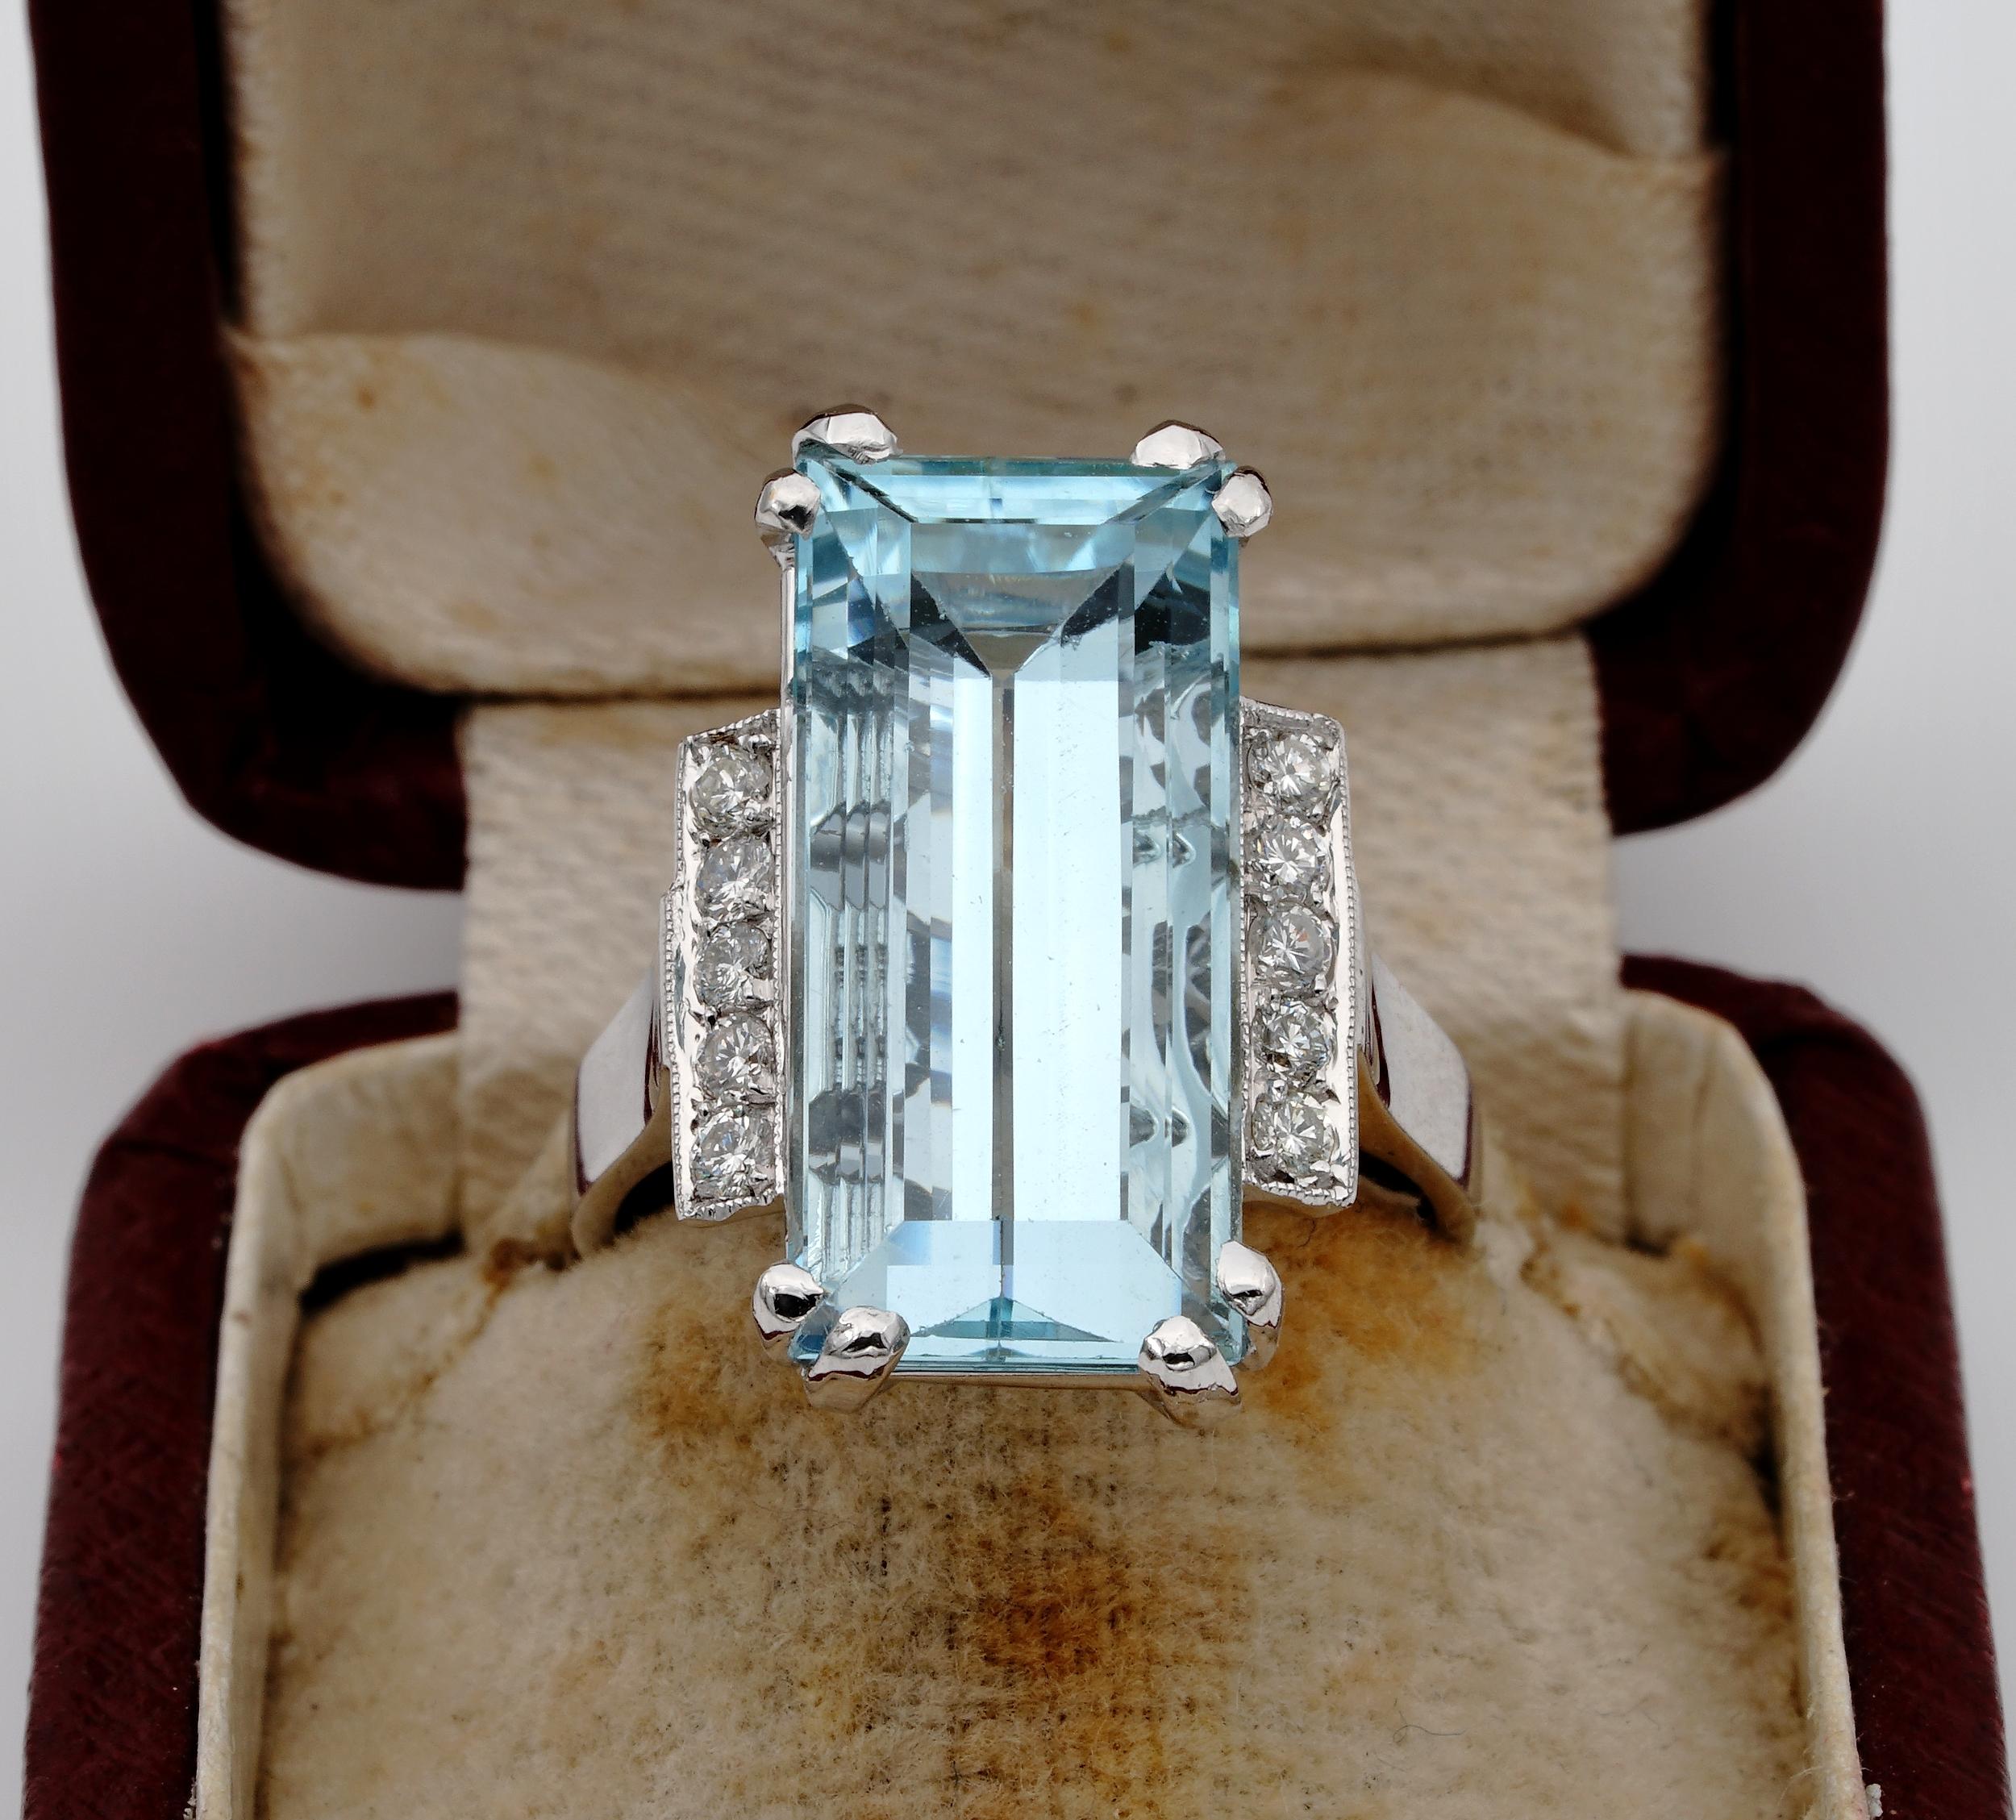 Beautiful Retro Aquamarine and Diamond ring hand crafted as unique of solid 18 Kt white gold
1945 ca
Beautully modelled with Diamond steps aside and lovely pierced basket work on the reverse
Set with a fabulous elongated emerald cut natural